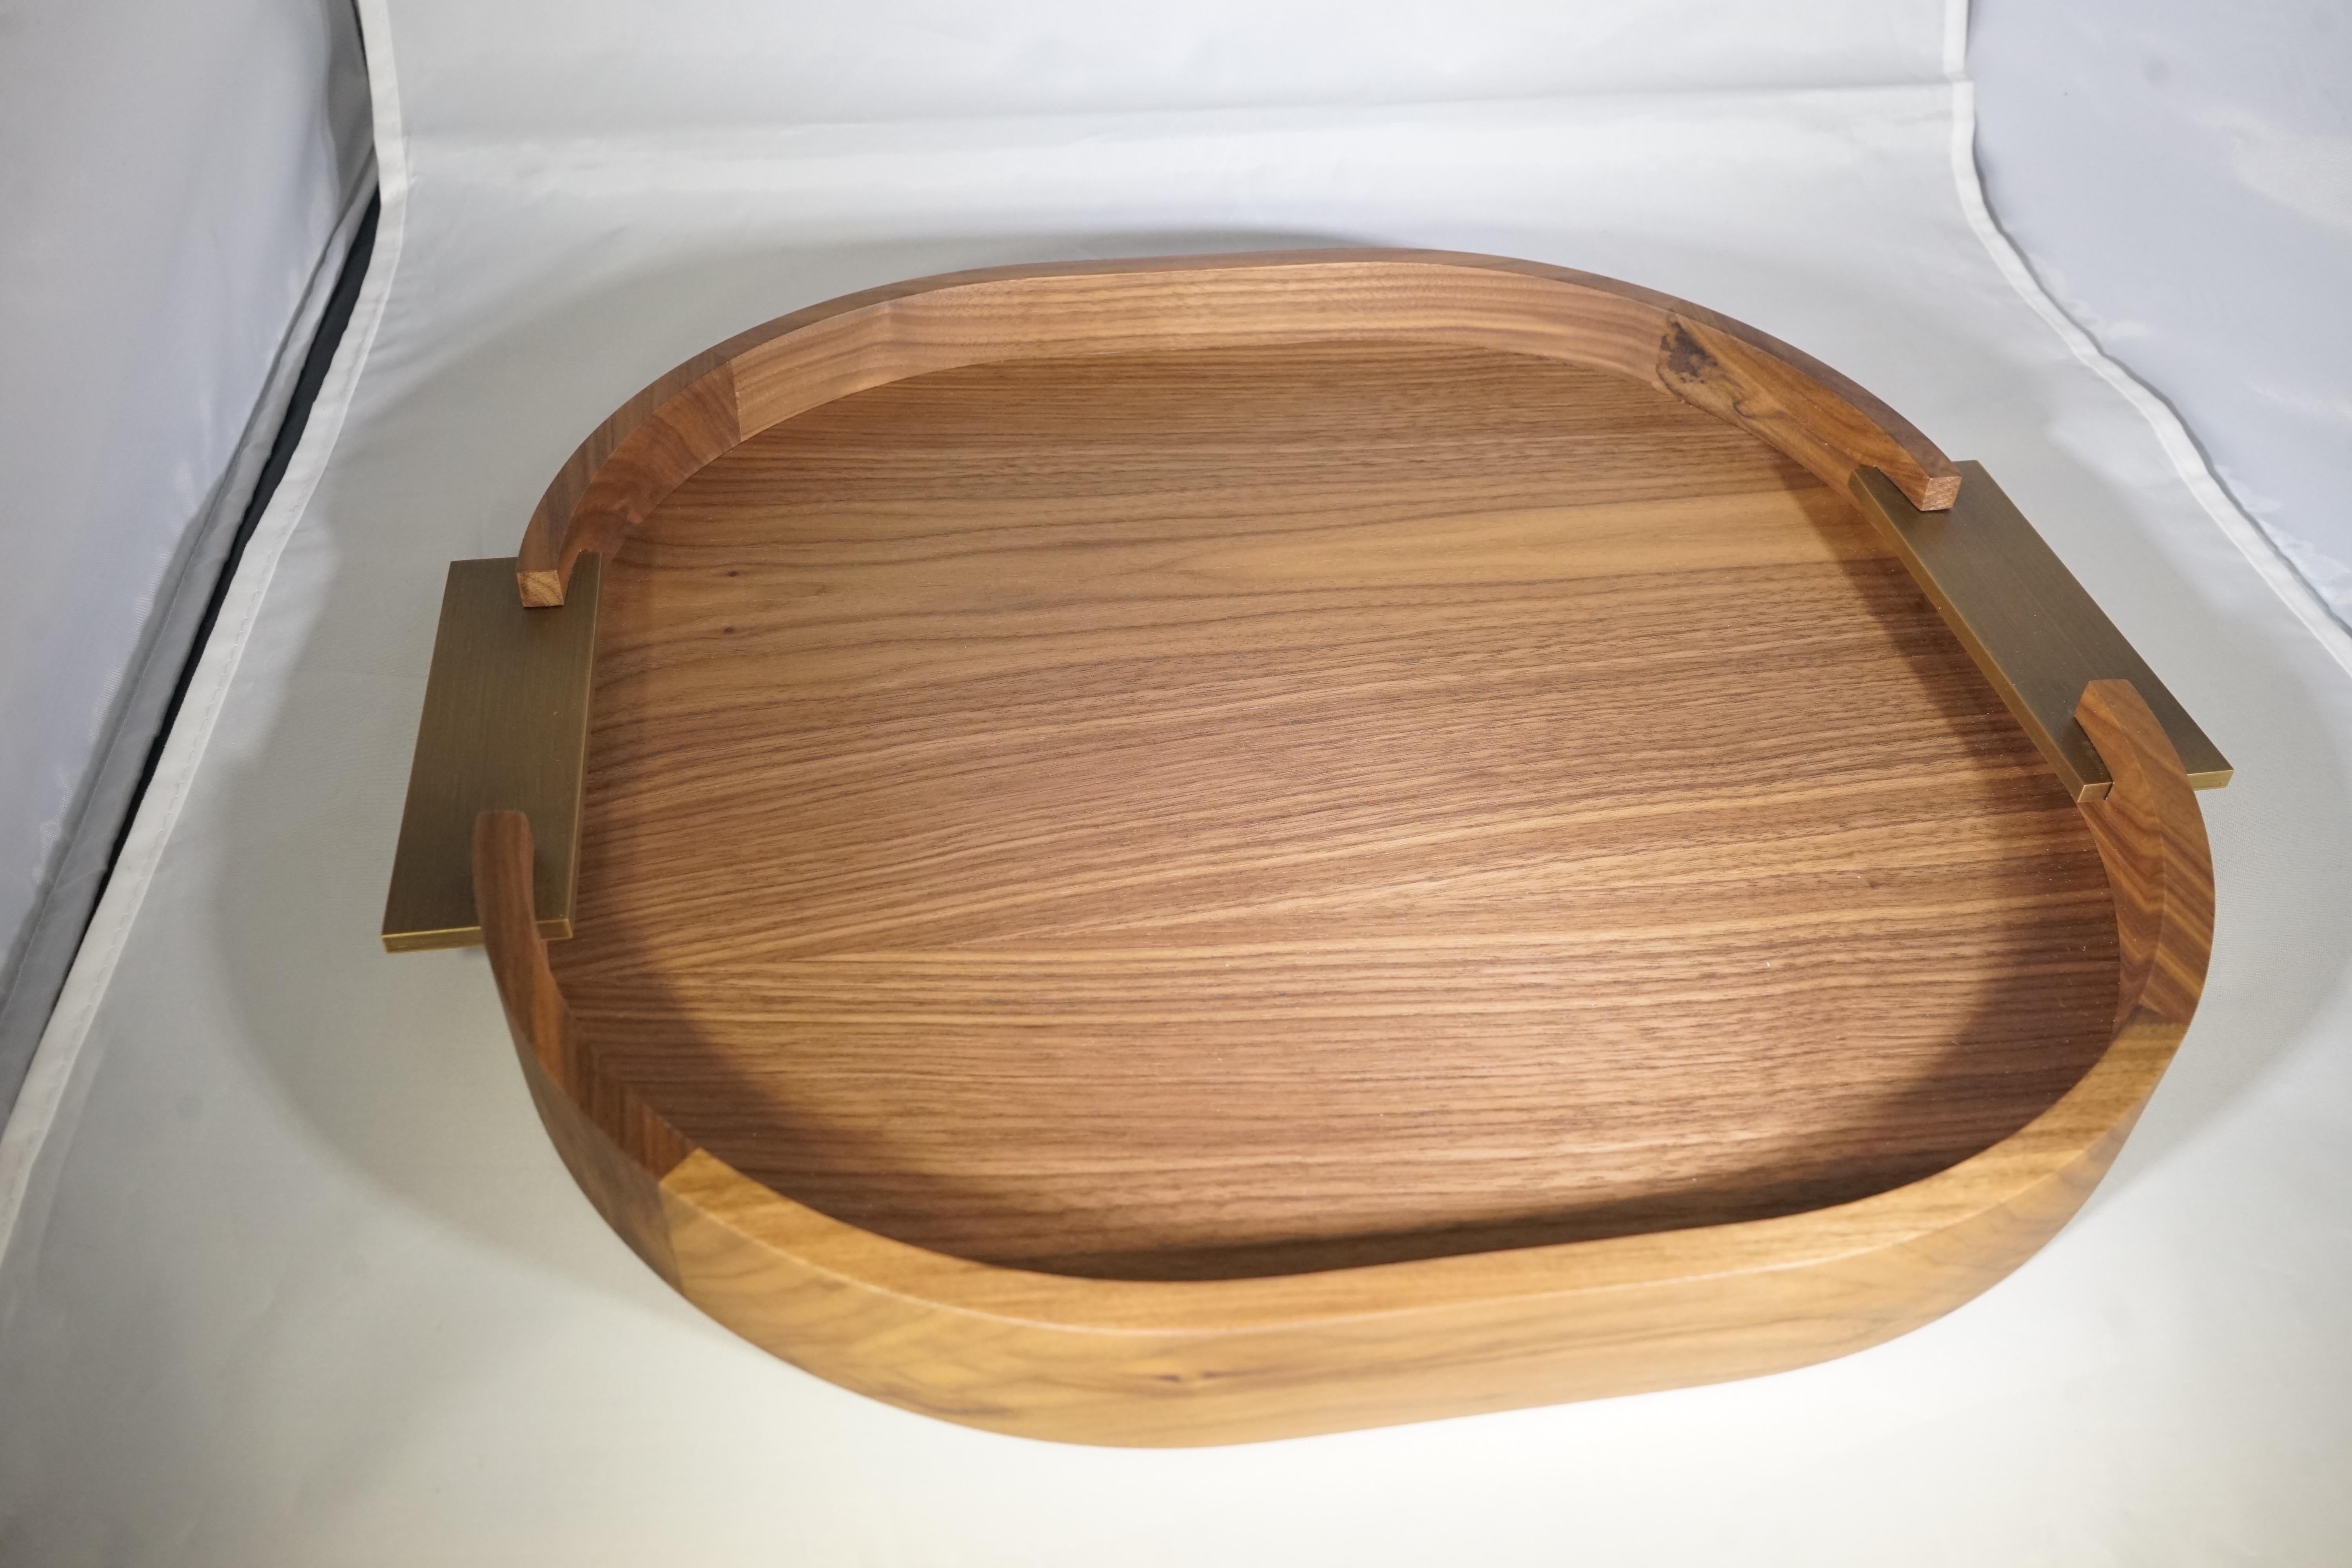 Contemporary Italian natural wood tray with rounded corners. Brass metal handles. Made in Italy.